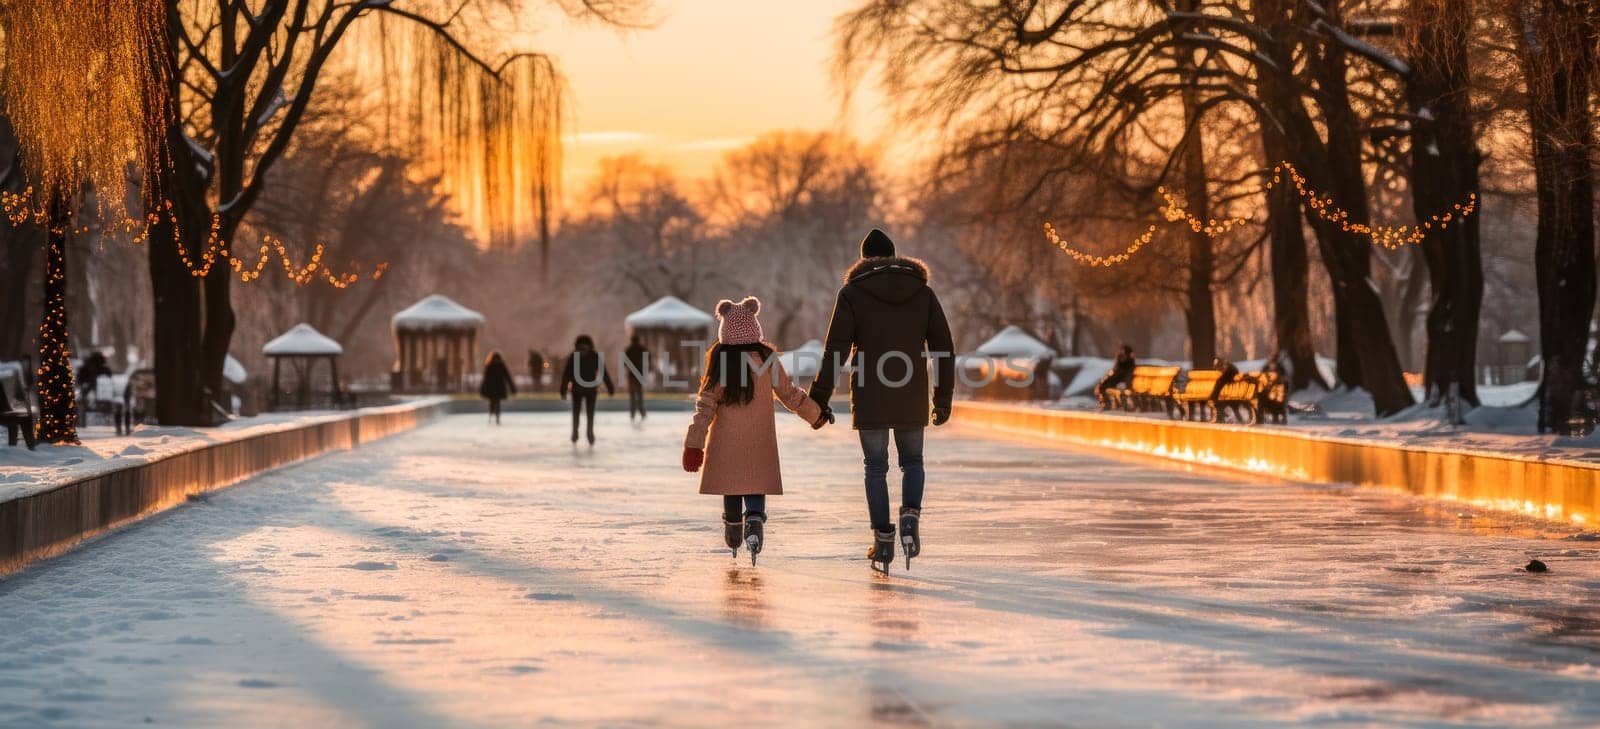 Winter skating of dad with daughter by Yurich32